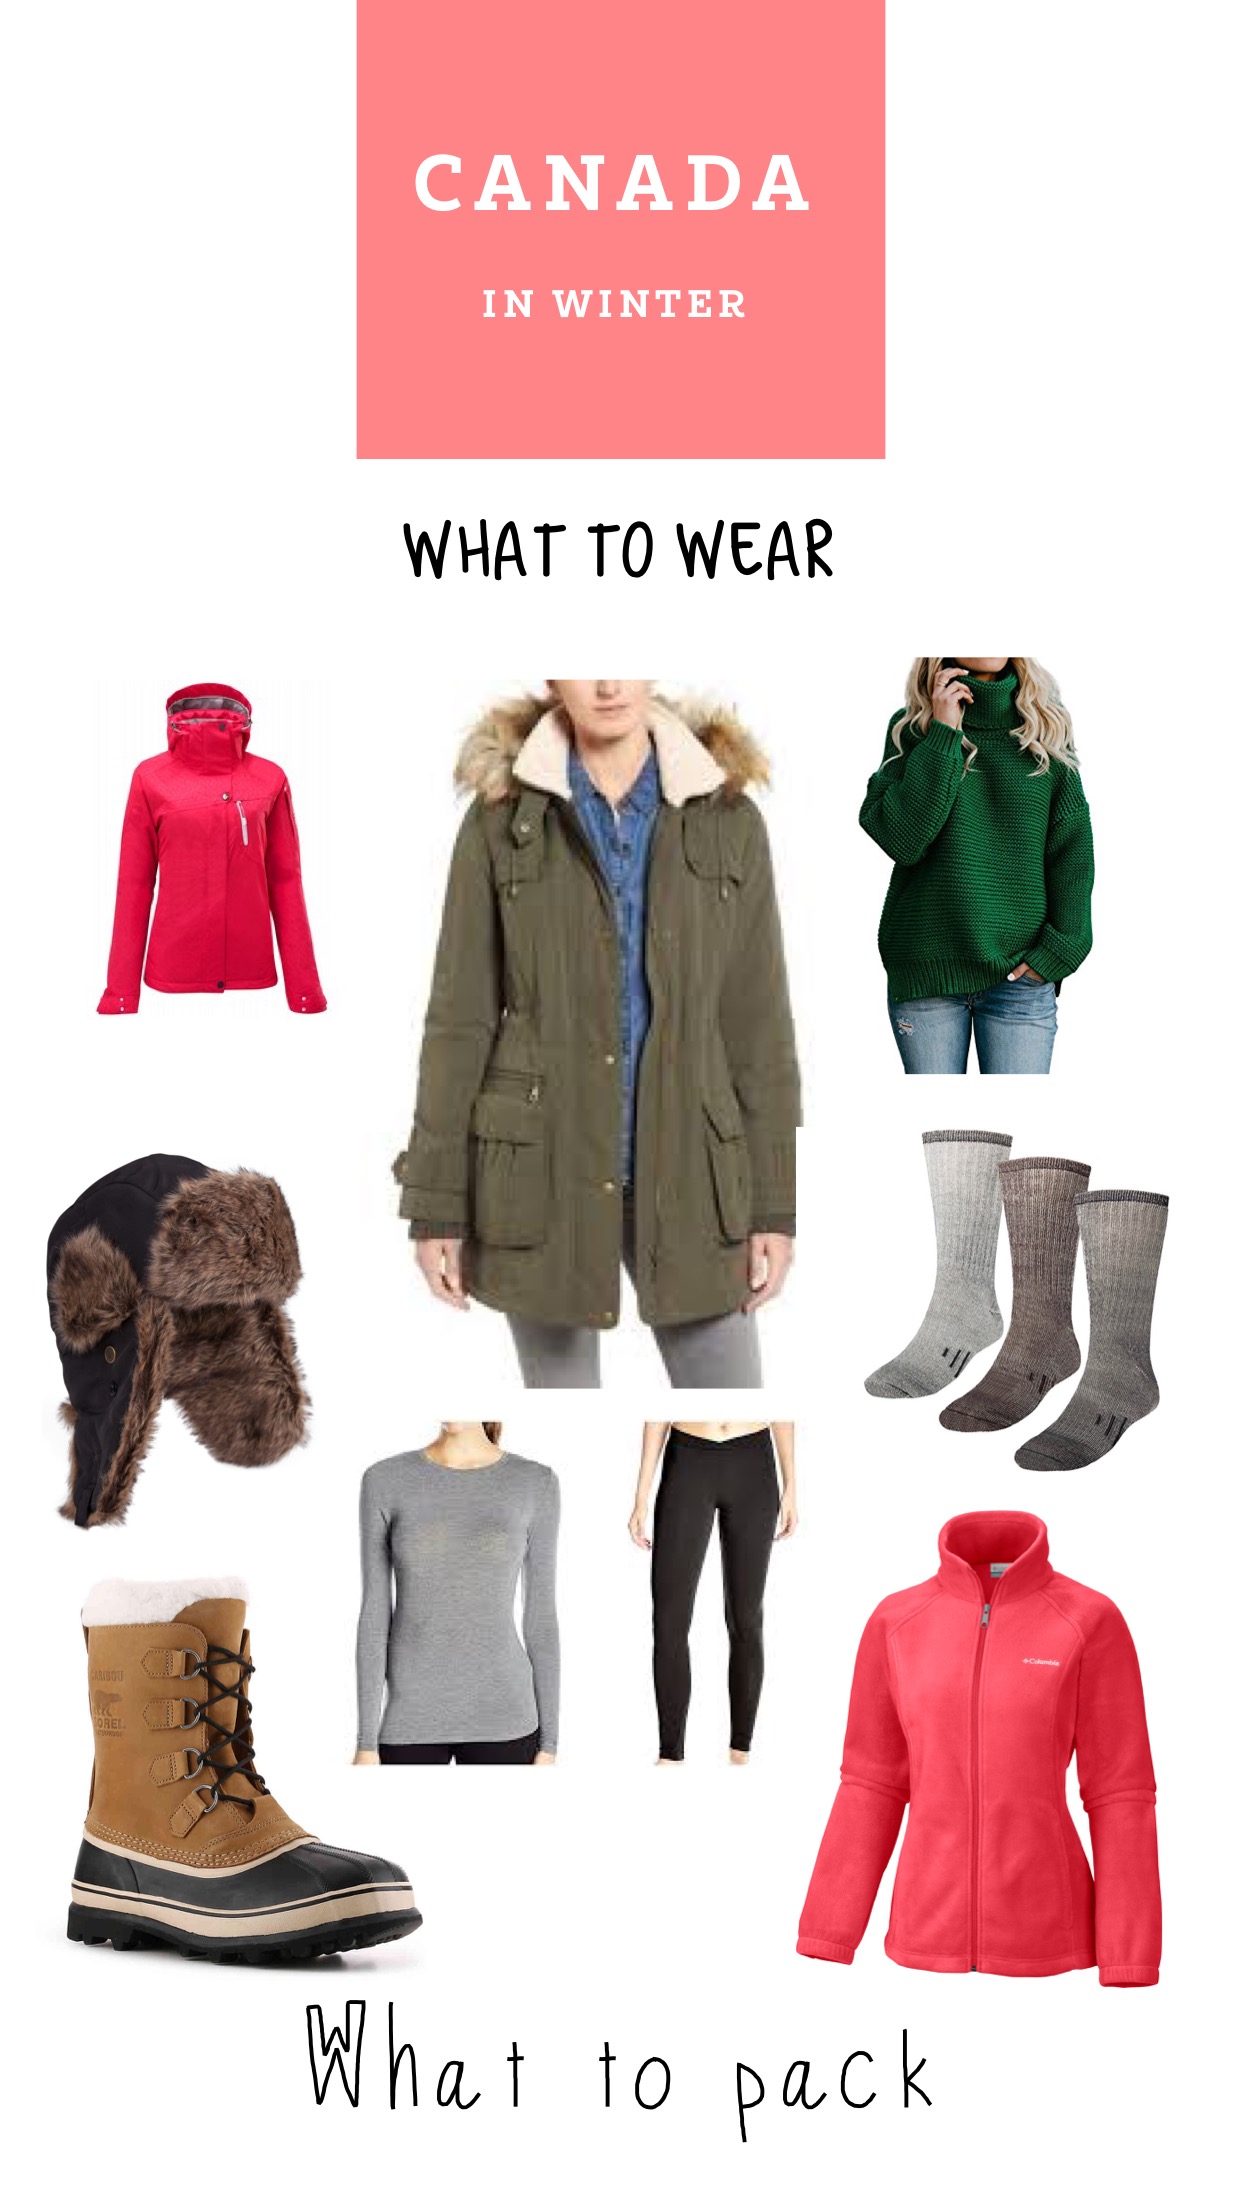 What to wear in Canada in winter